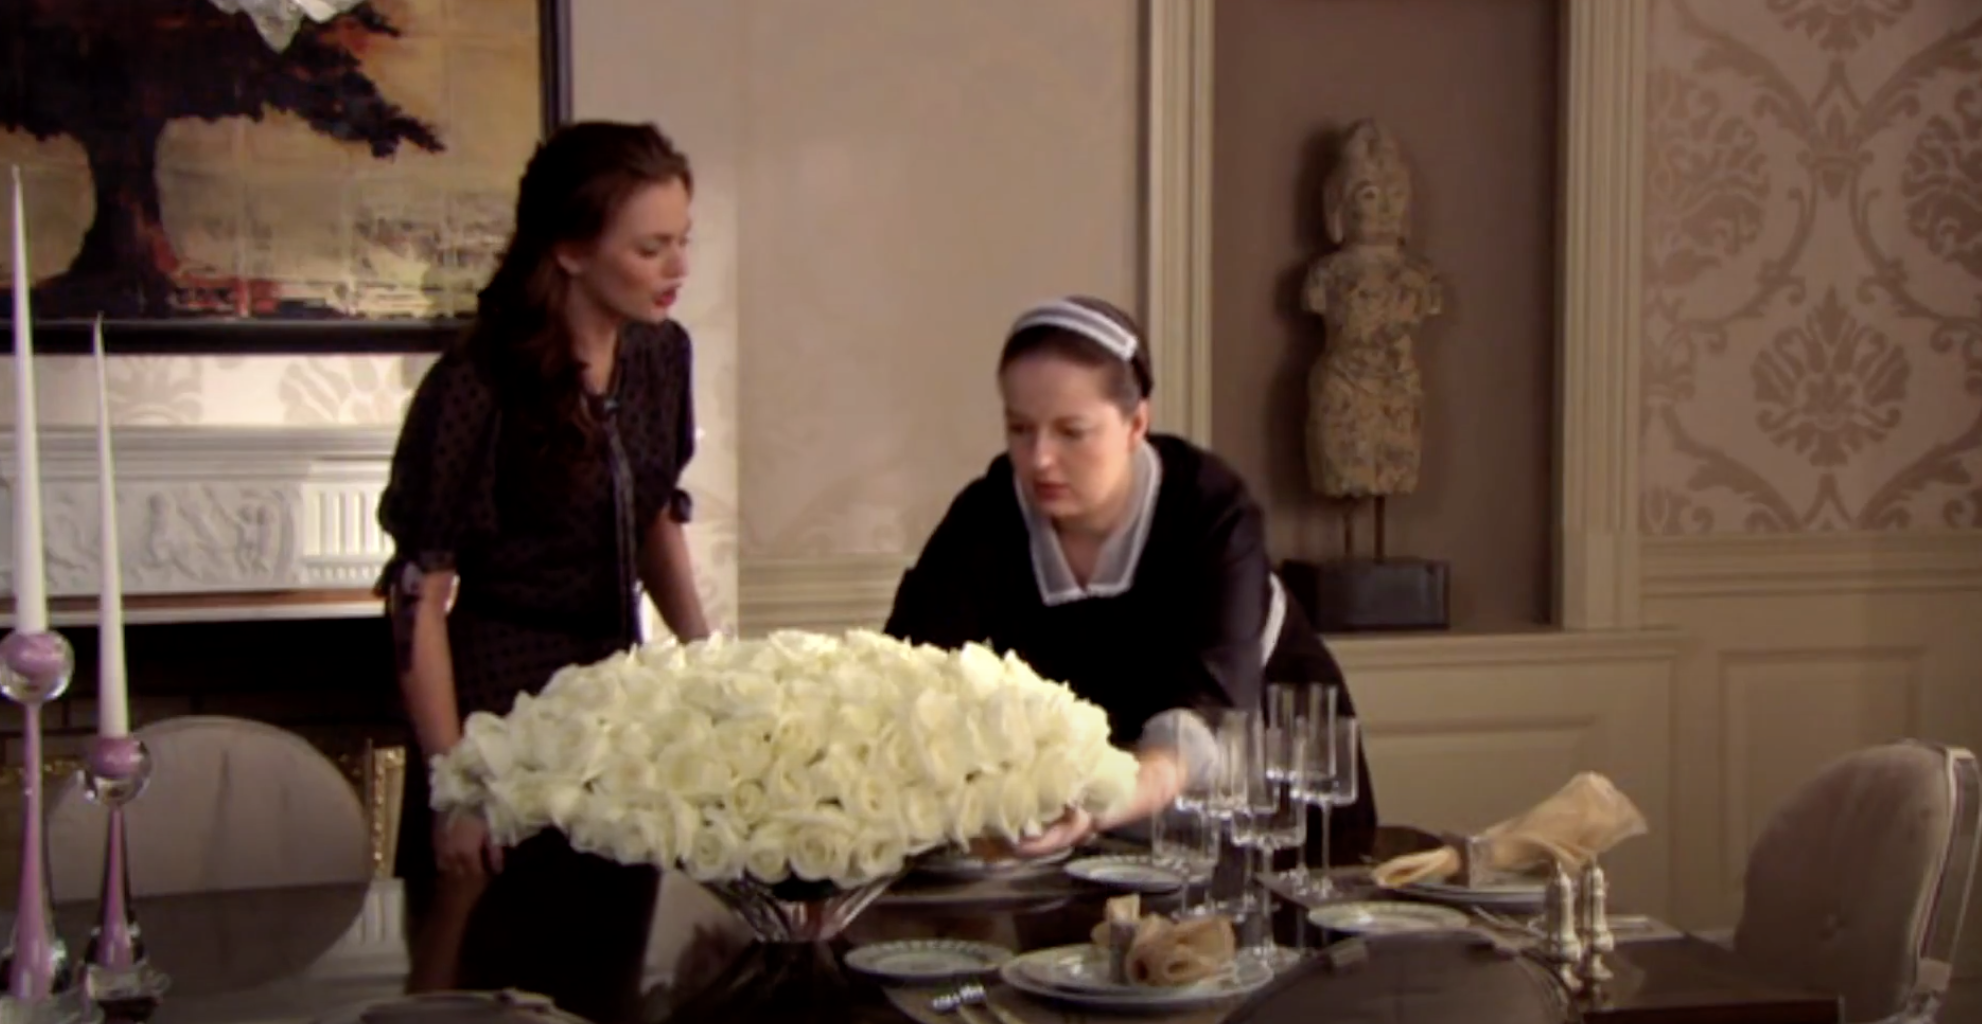 a maid rearranging flowers while the teenager stands nearby talking